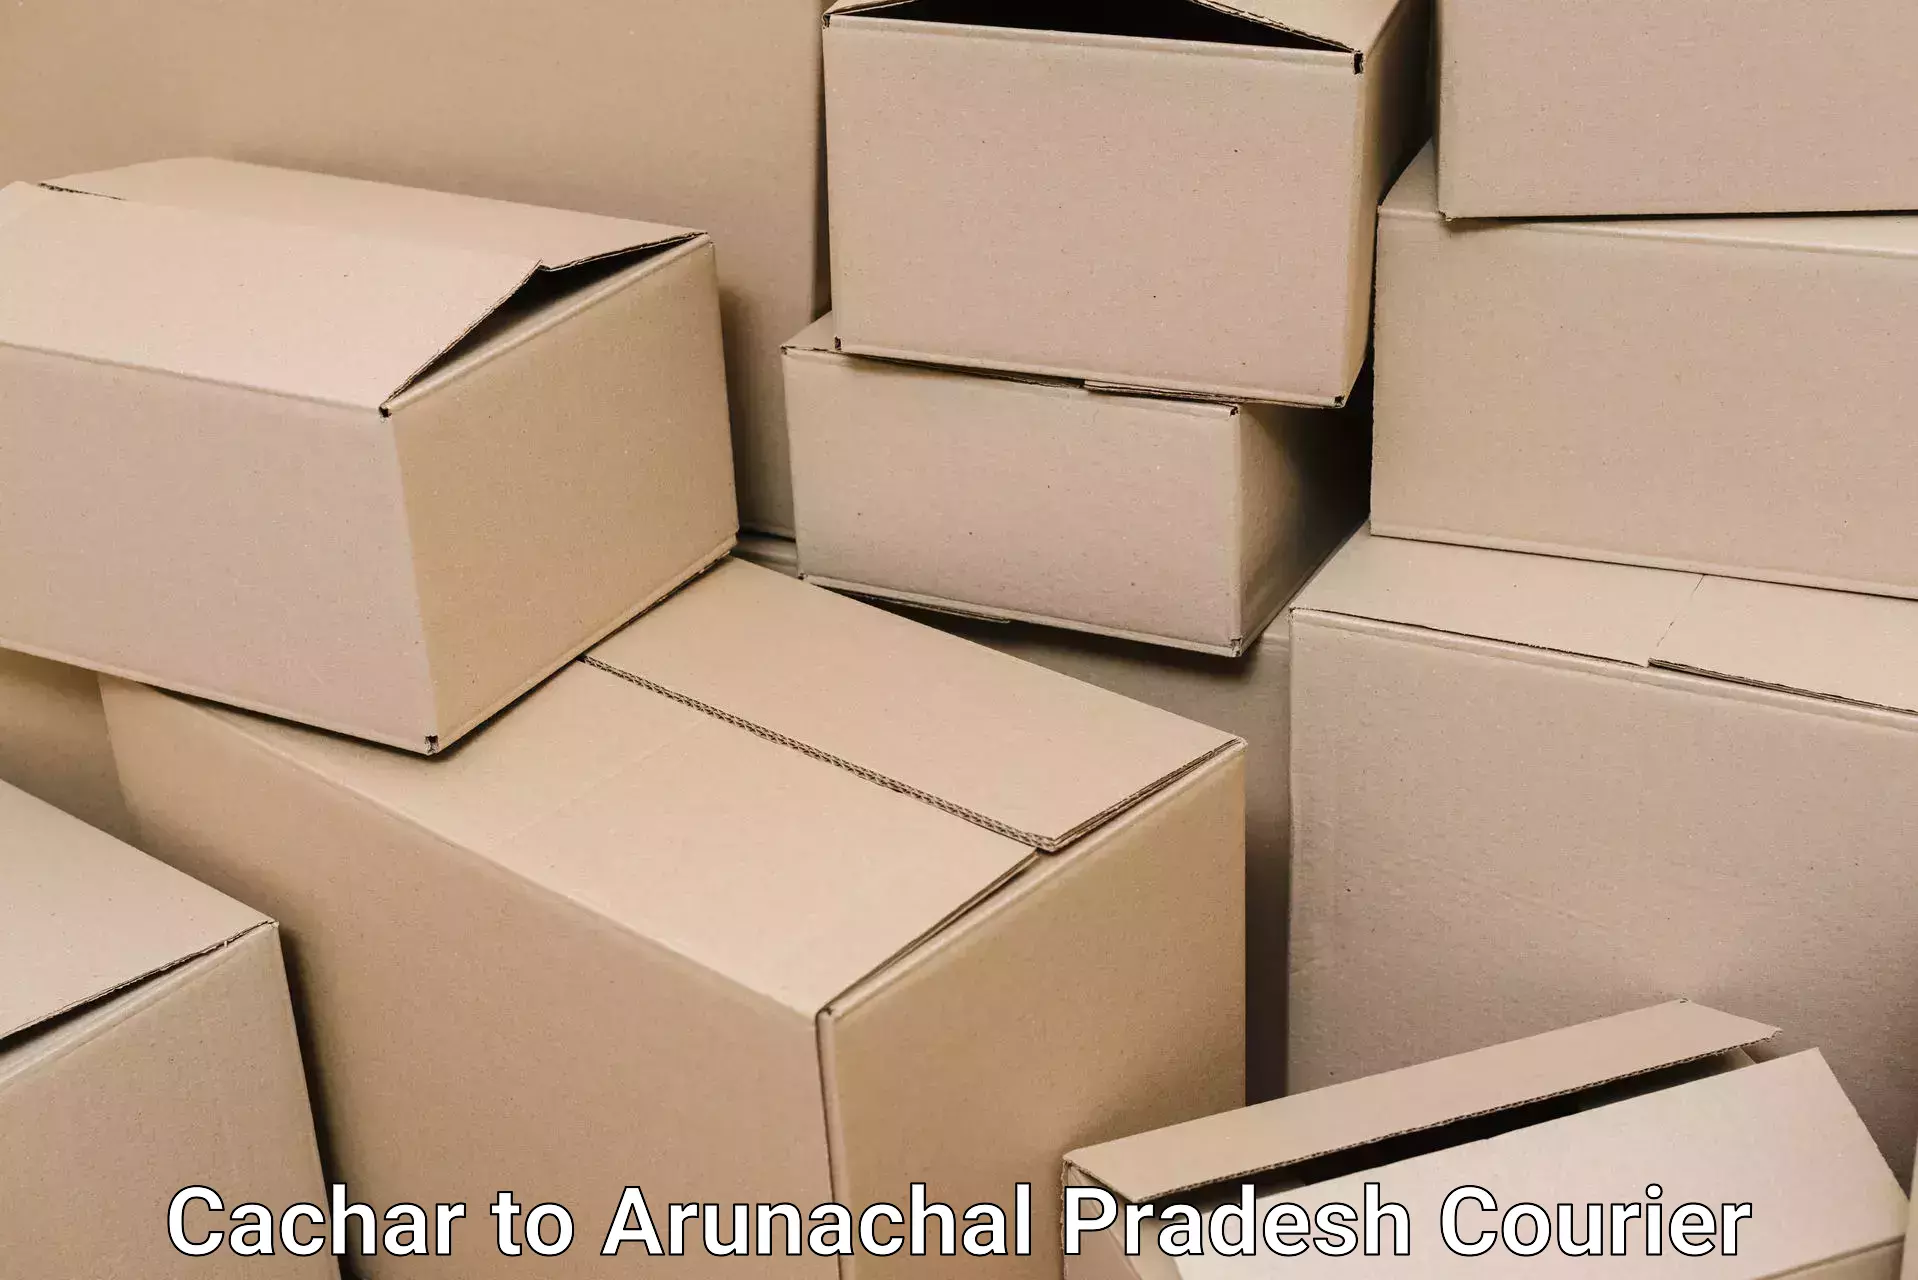 Quality moving and storage Cachar to Deomali